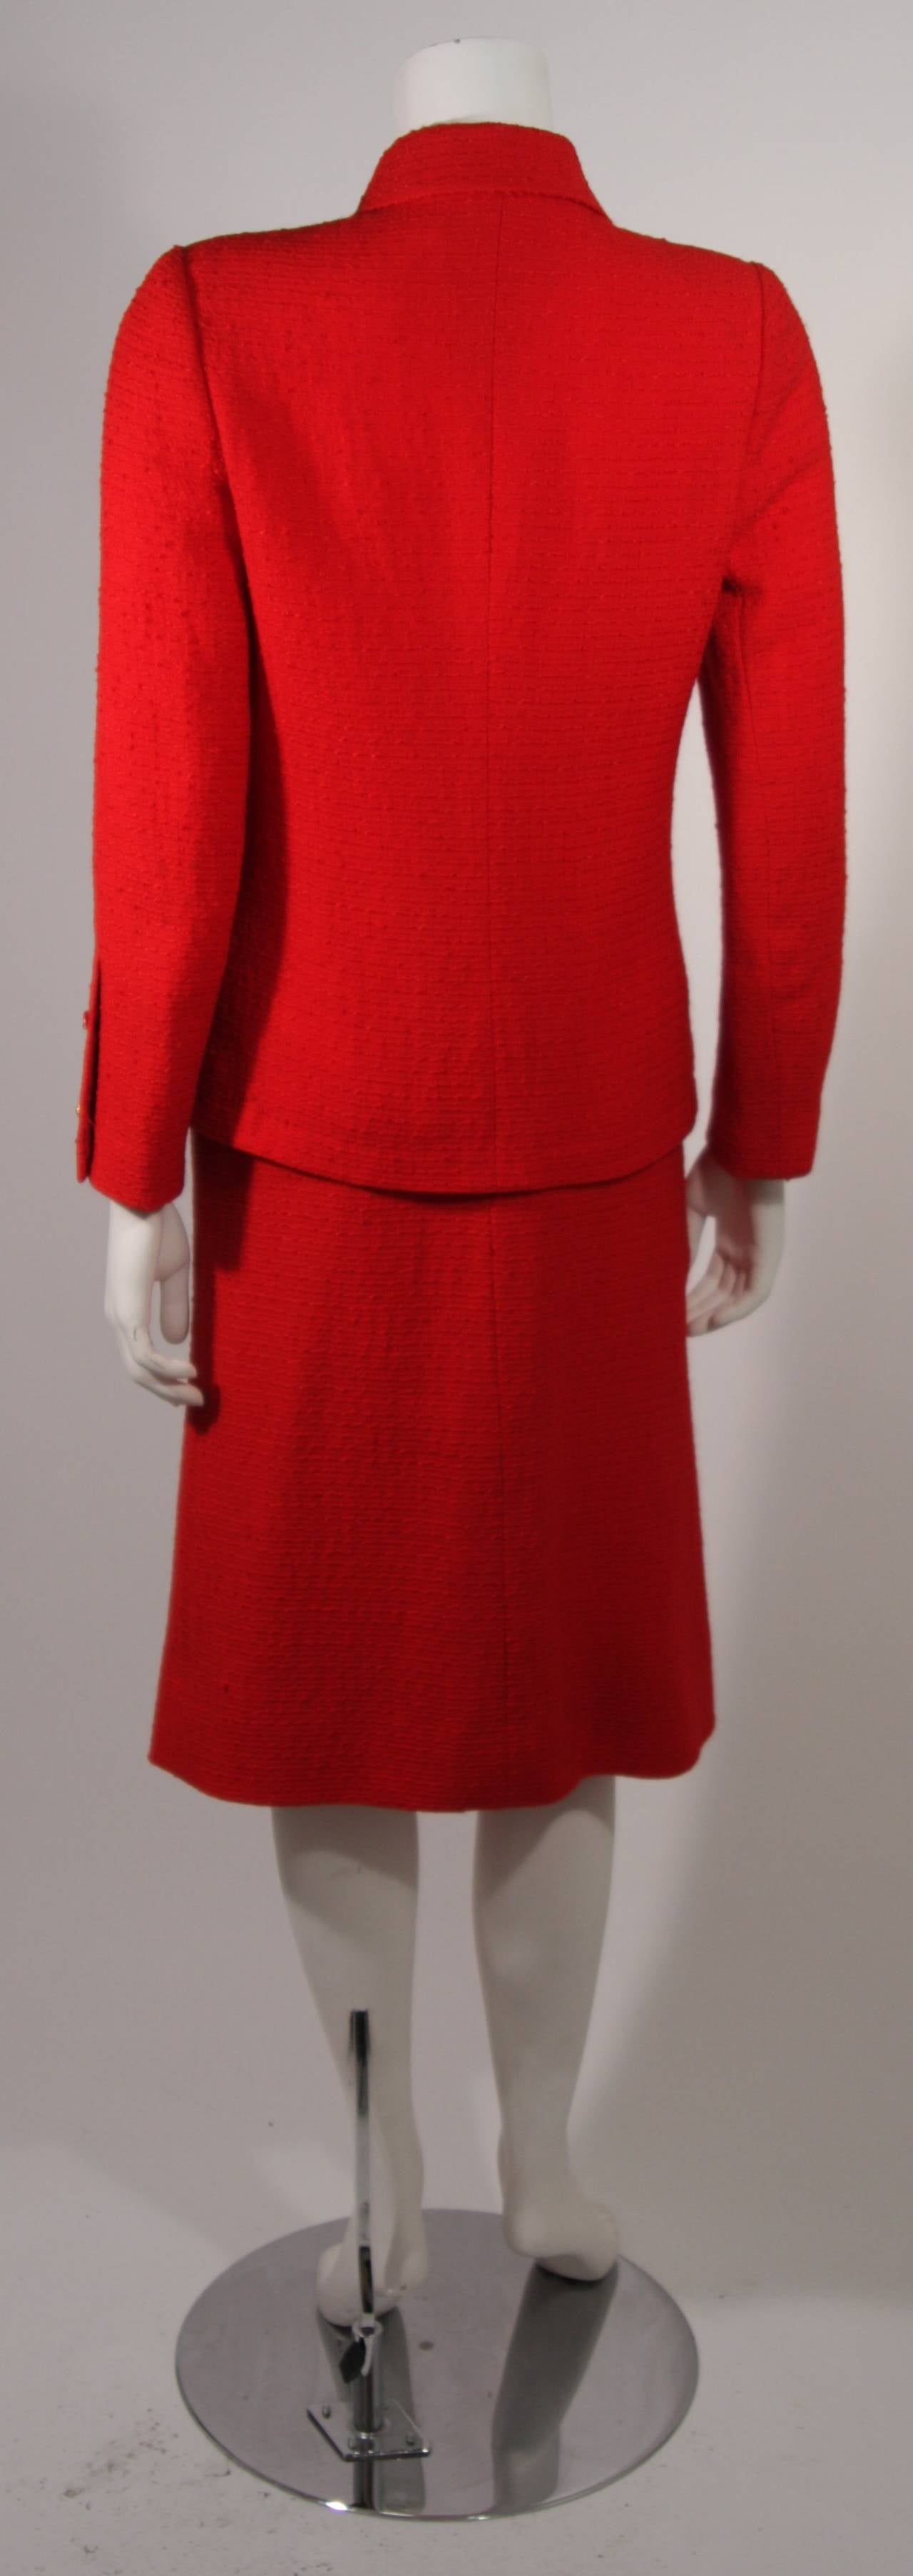 Chanel Red Wool Silk Boucle Skirt Suit Size 36 2